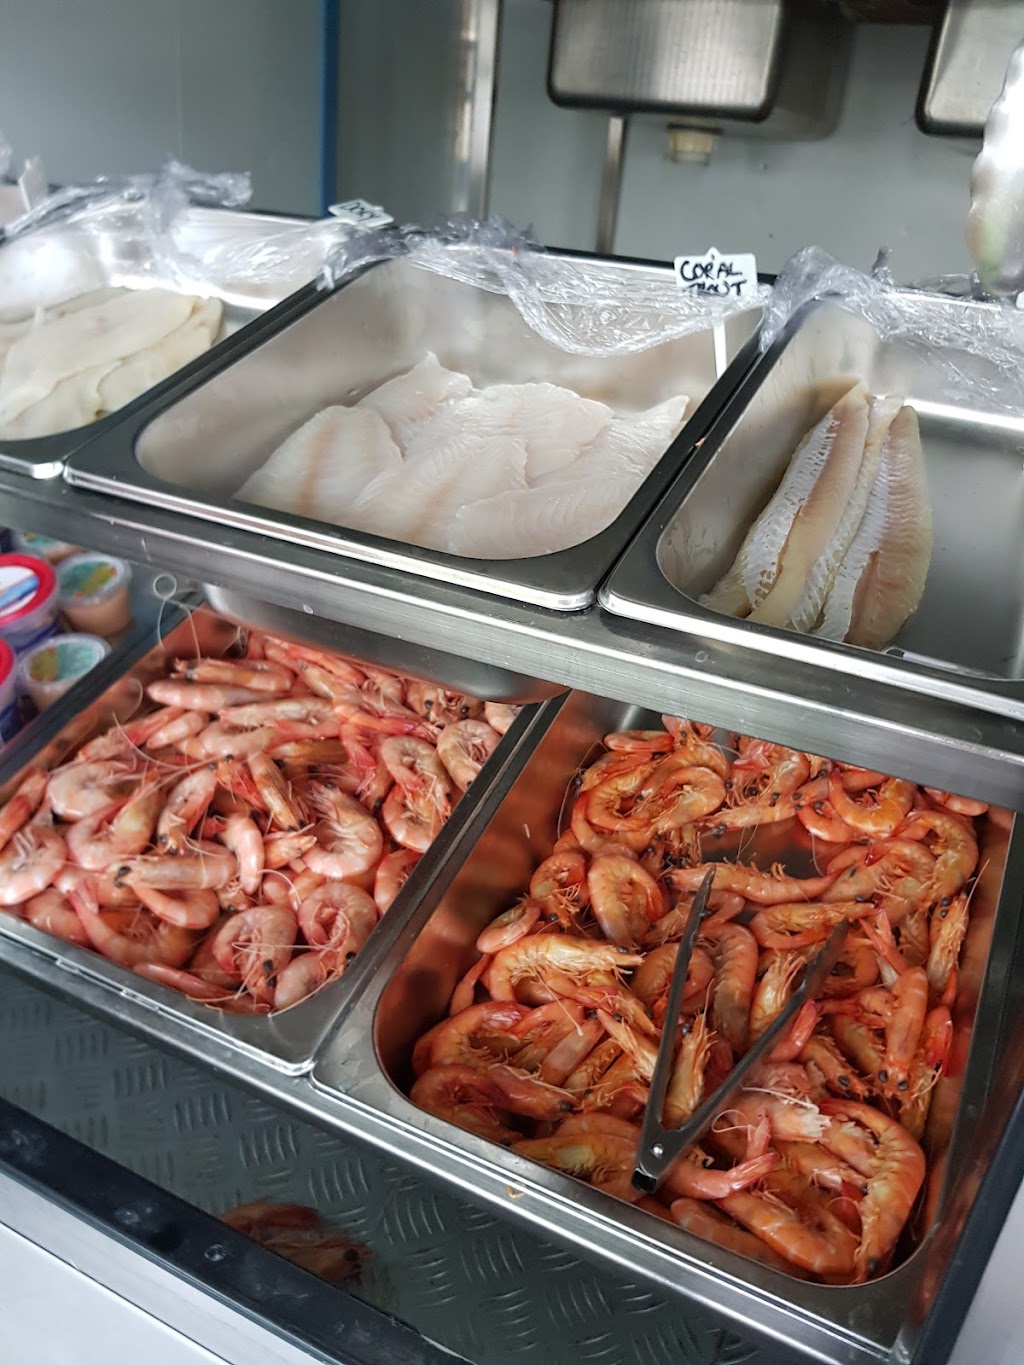 Choppers Mobile seafood | Walloon QLD 4306, Australia | Phone: 0410 344 469